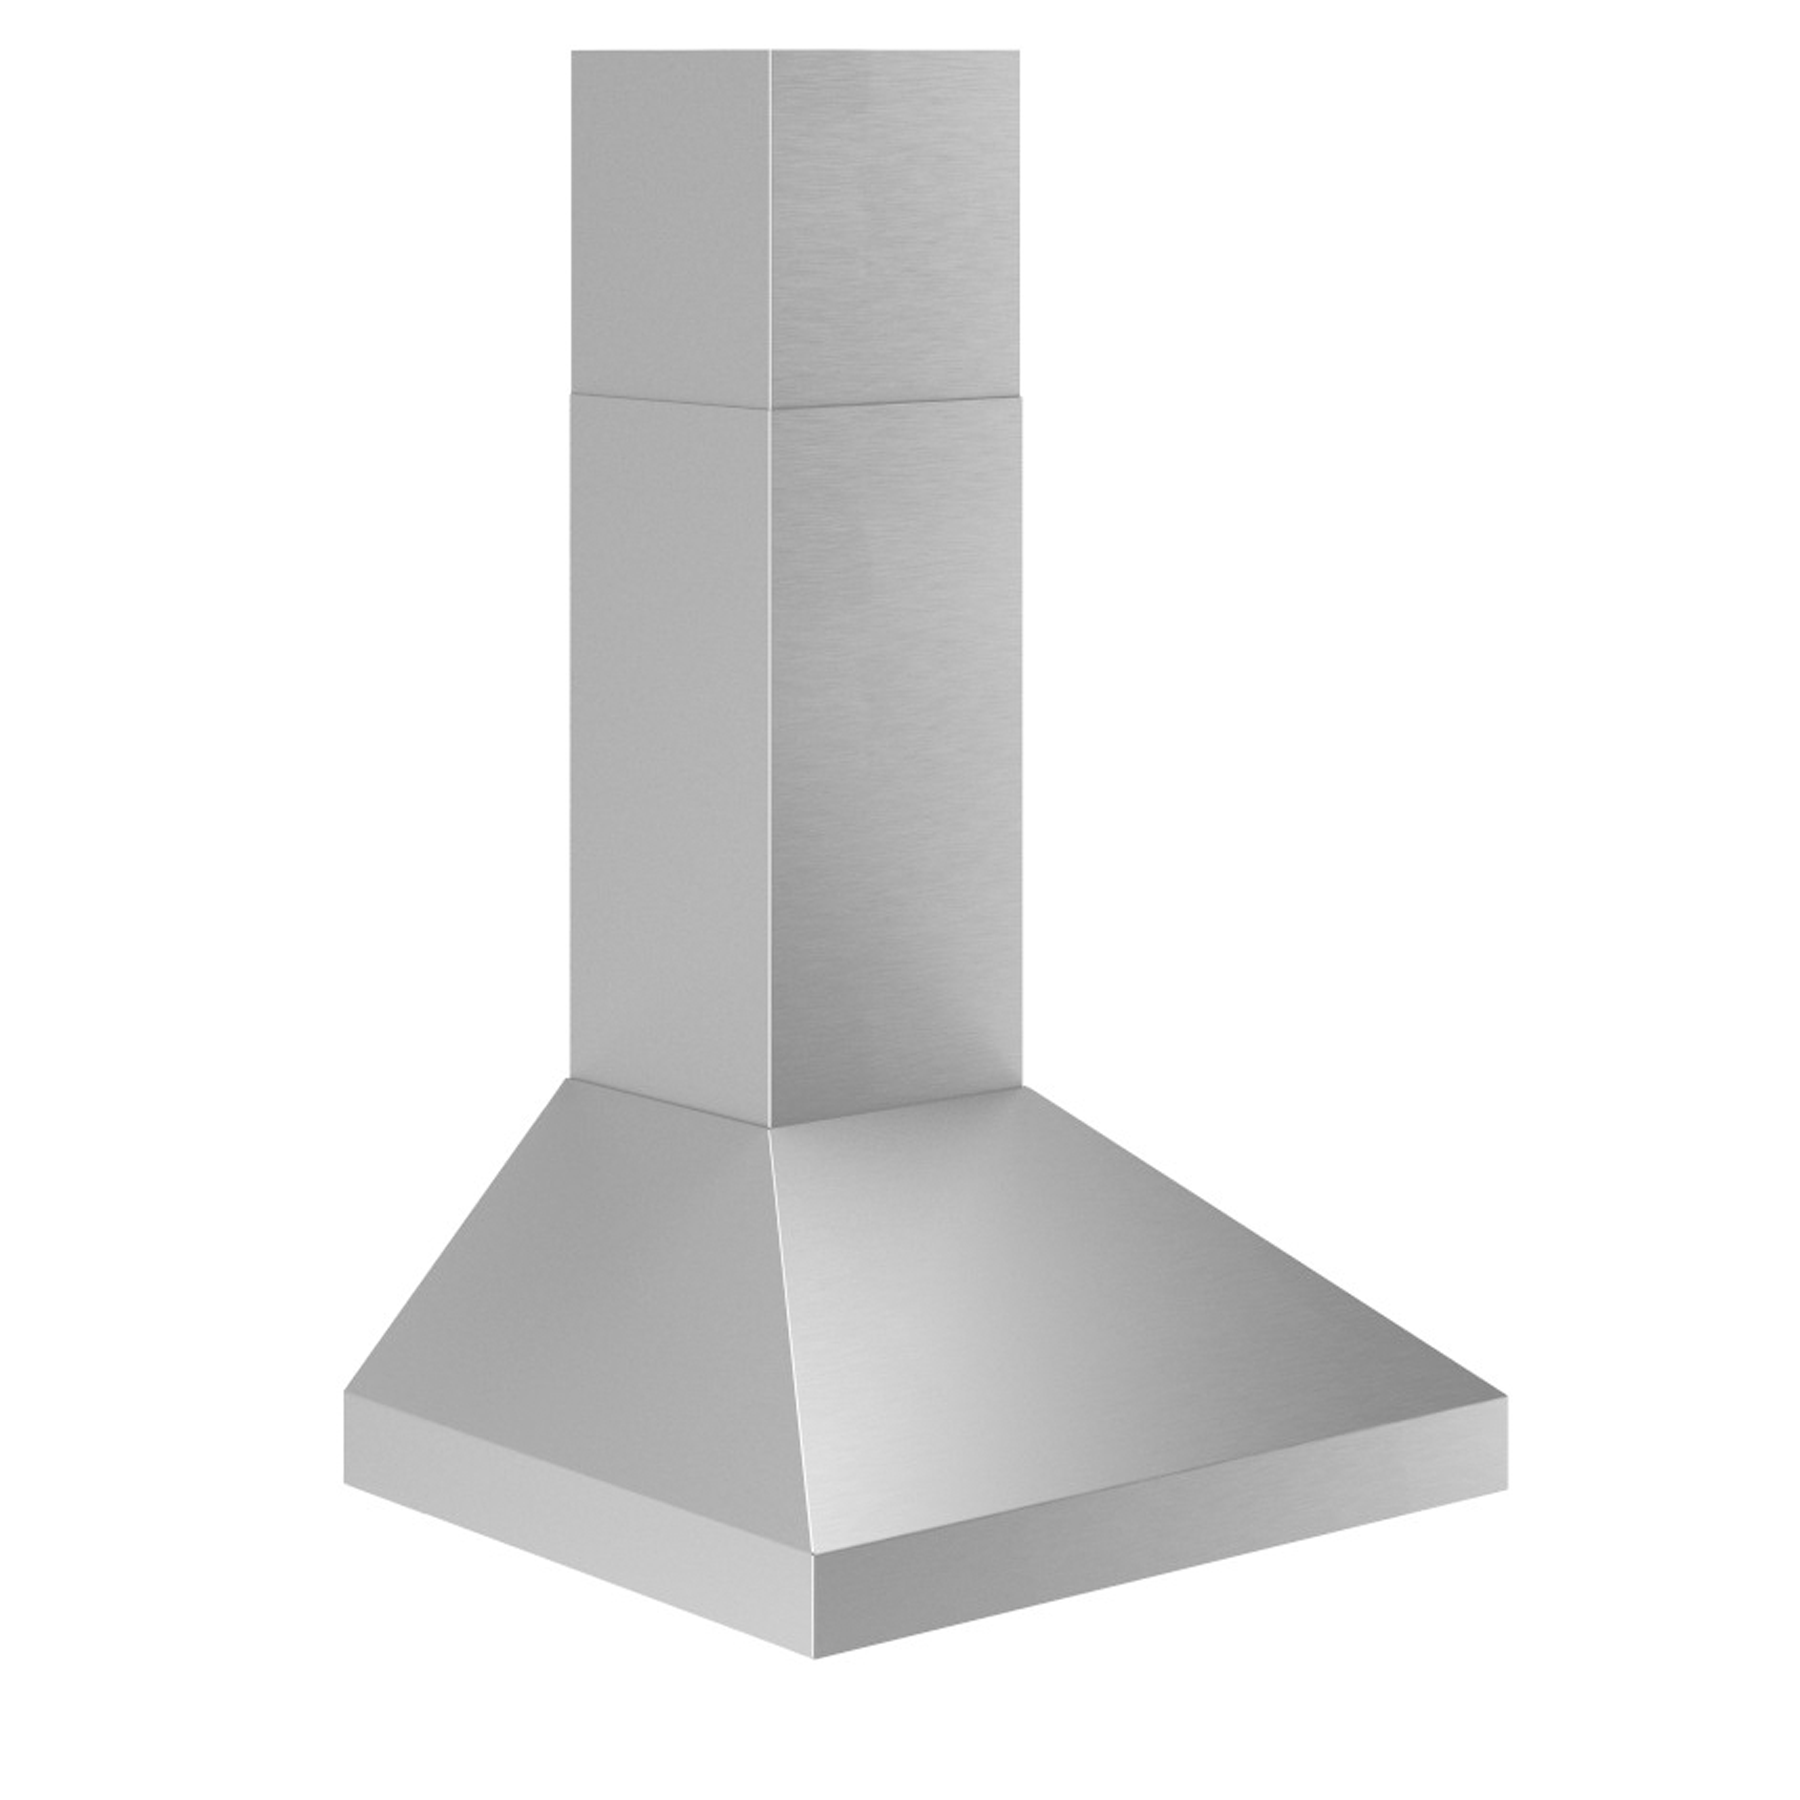 Best - 41.88 Inch Outdoor Range Hood Vent in Stainless - WTD9M42SB